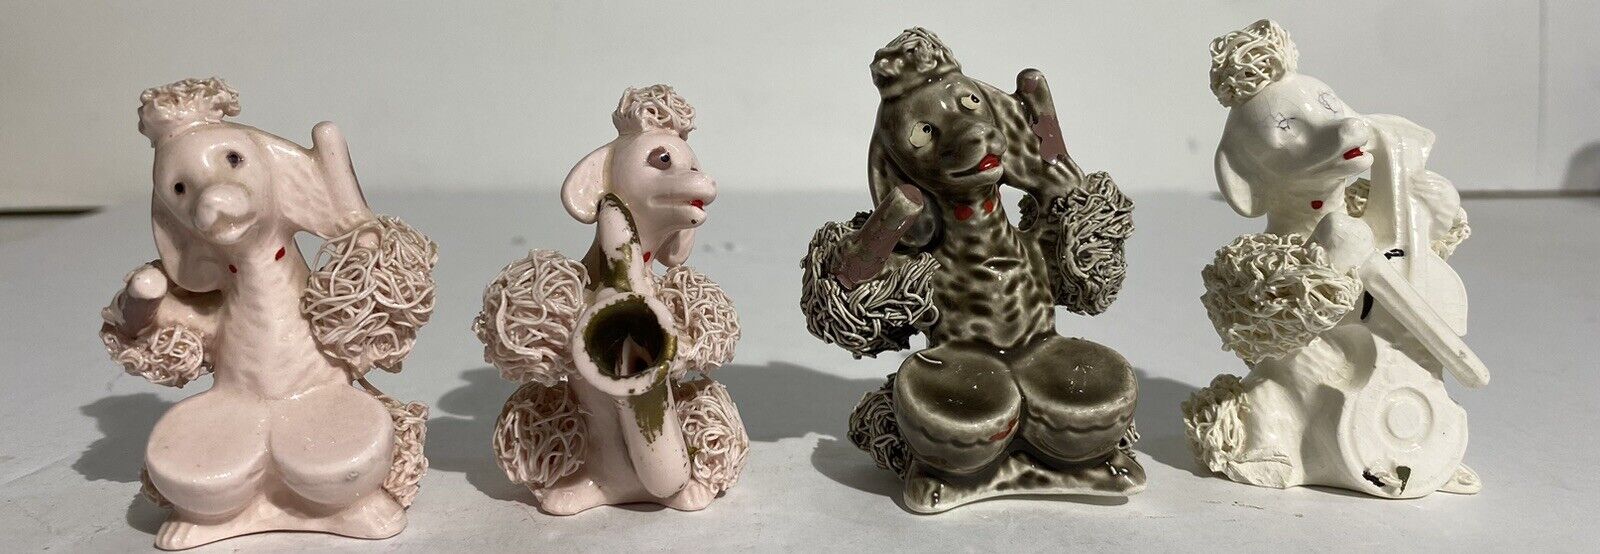 Vintage Spaghetti Poodles. 4 Total. Pink, Gray And White. Playing Instruments.